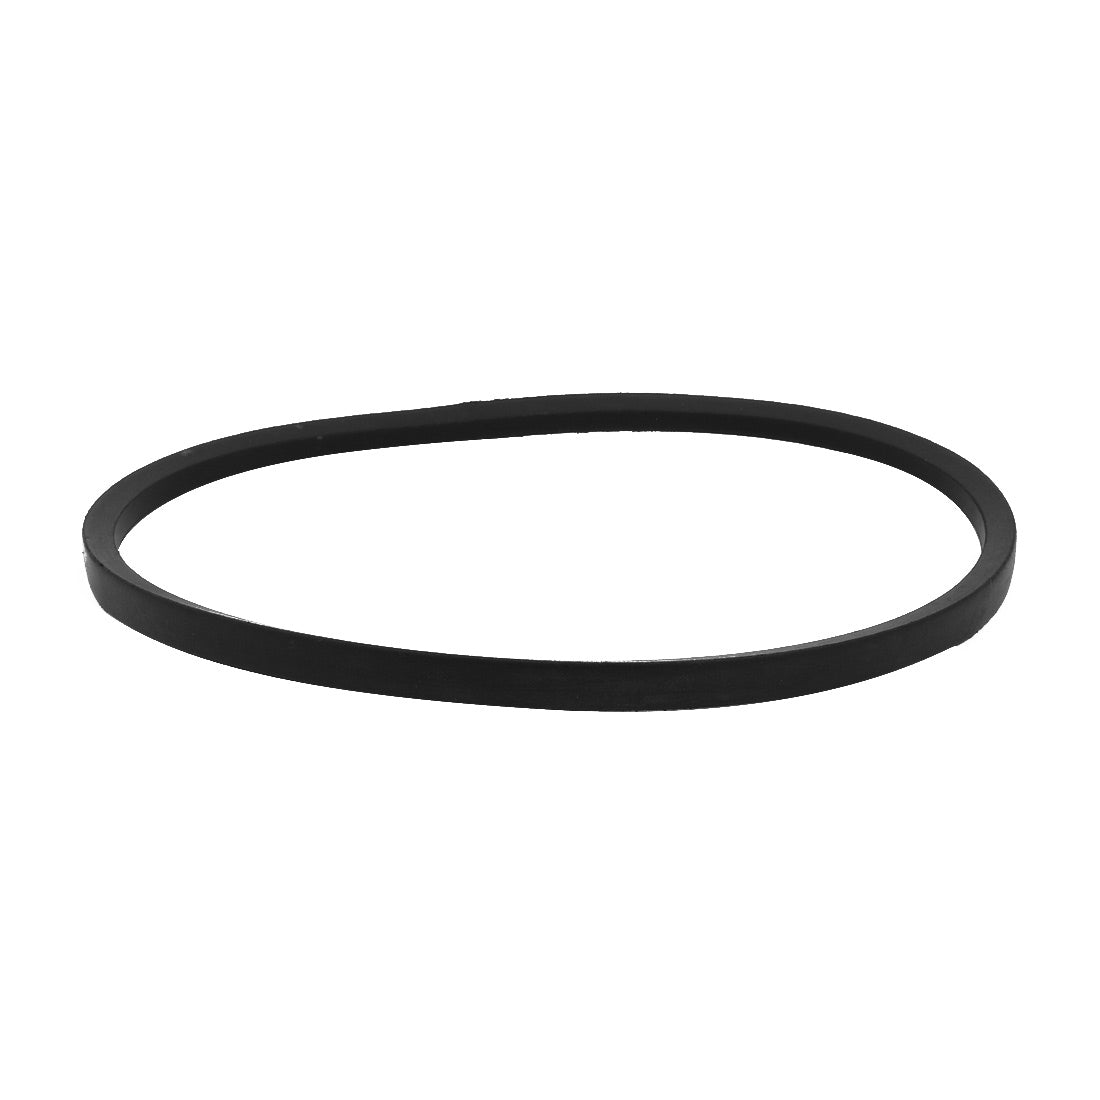 uxcell Uxcell A660 Rubber Transmission Drive Belt V-Belt 8mm Thickness 660mm Inner Girth for Washing Machine